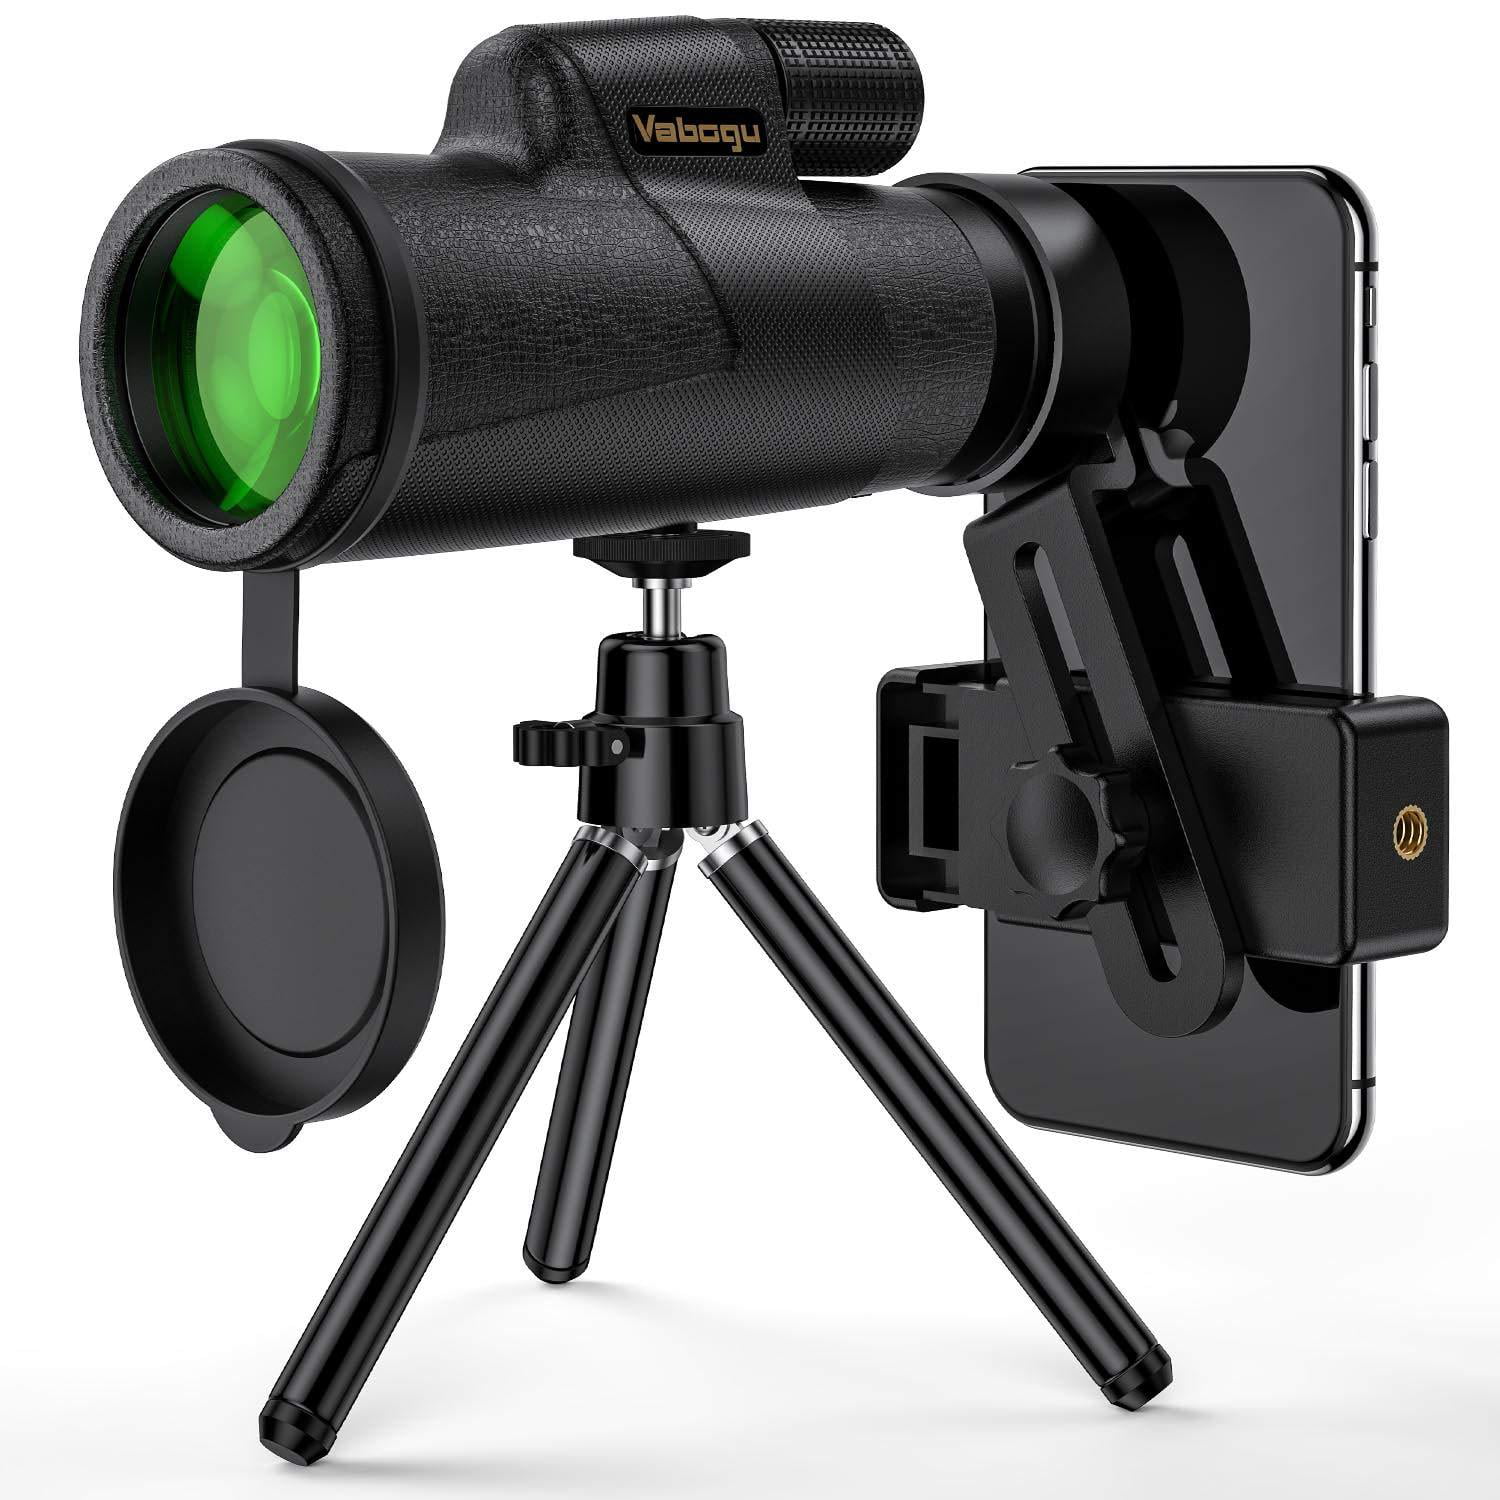 12x50 High Power HD Compact Monocular with Smartphone Holder & Phone Tripod for Adults Kids Night Vision IPX7 Waterproof FMC BAK4 Prism Scope for Bird Watching Monocular Telescope